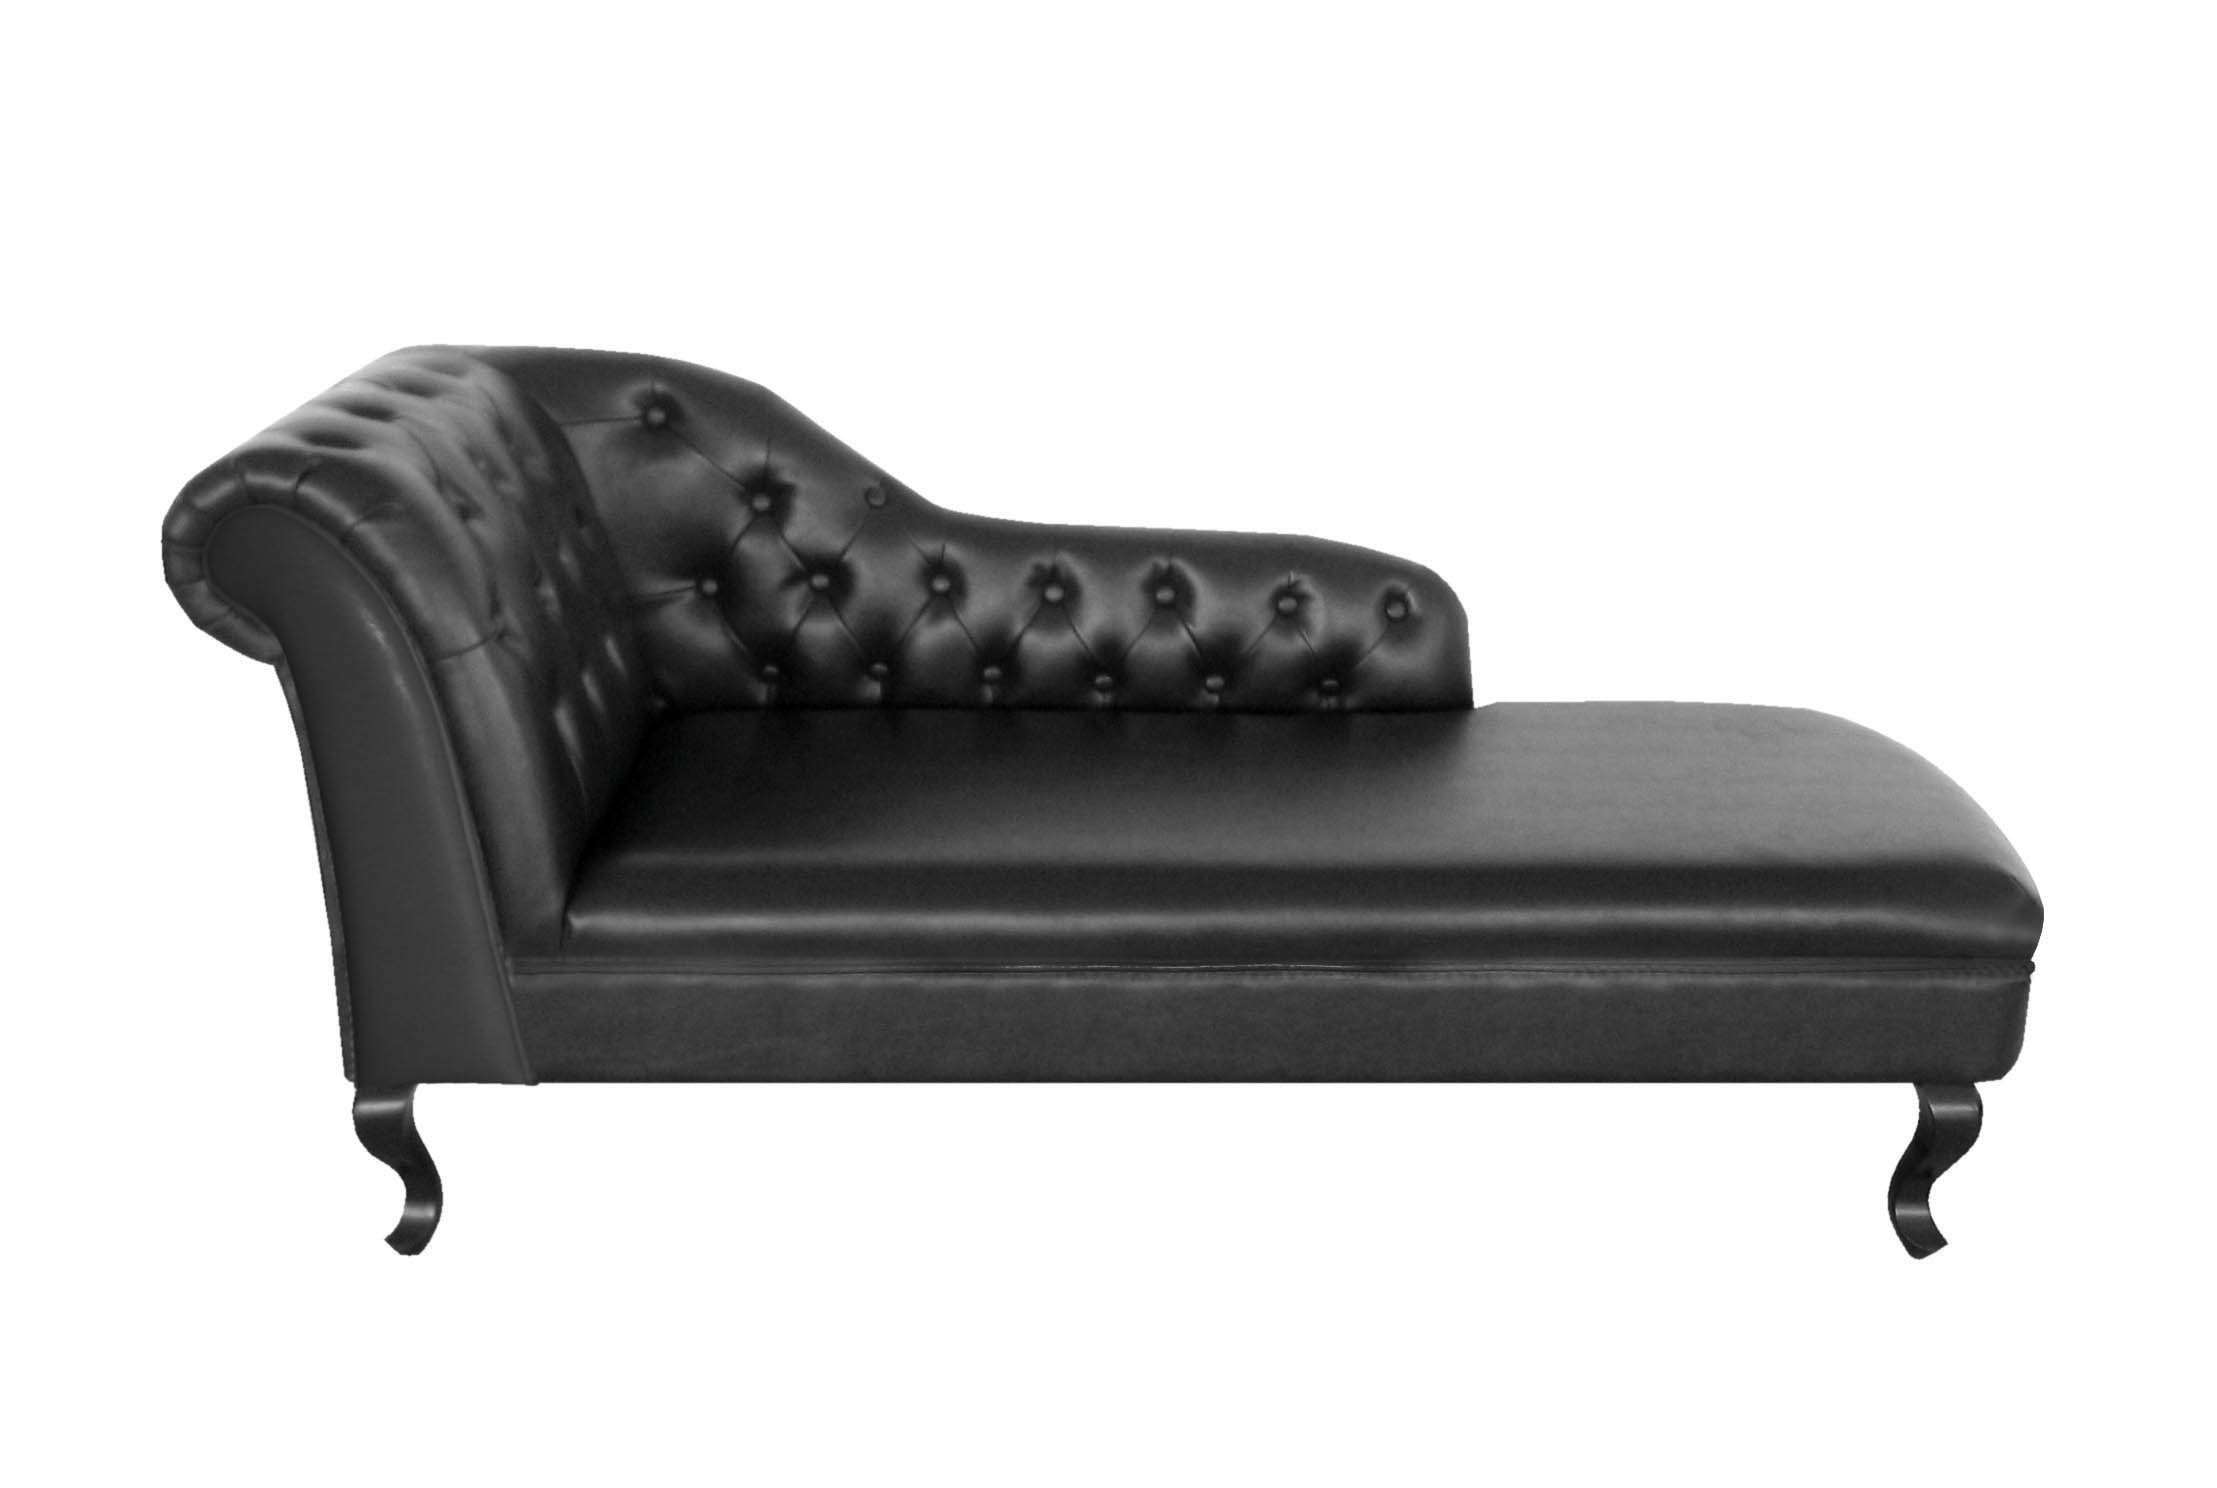 Black leather chaise lounge chair 5